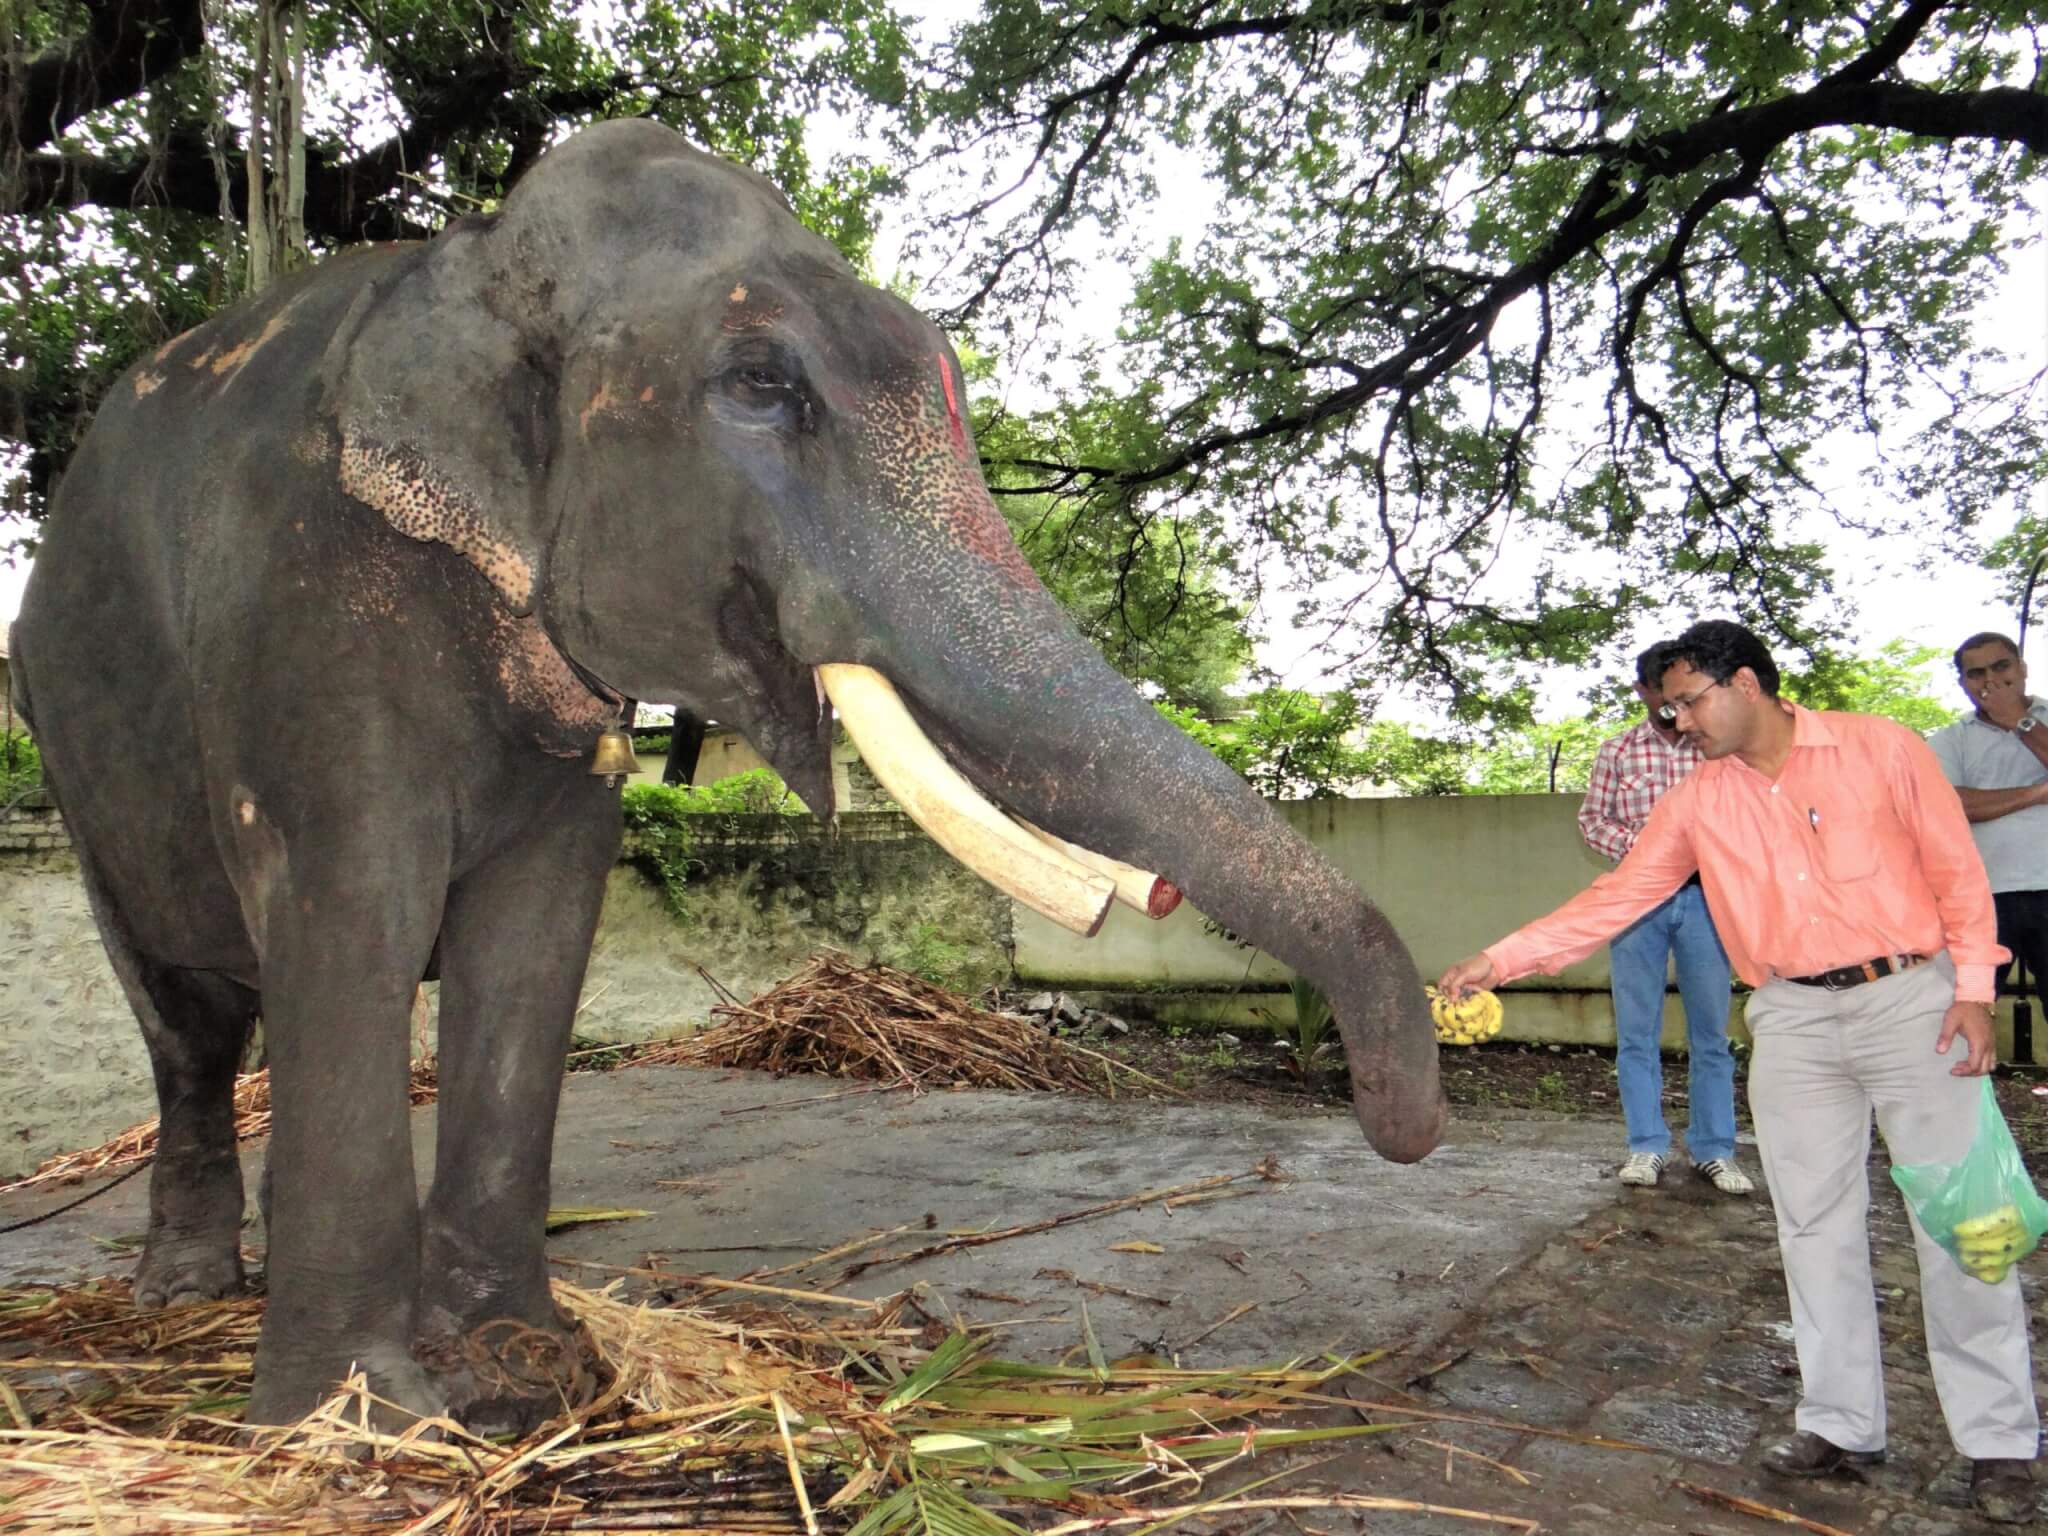 An Animal Rahat veterinarian offers Gajraj a banana. A rusty chain is tied around the elephant's front right leg.